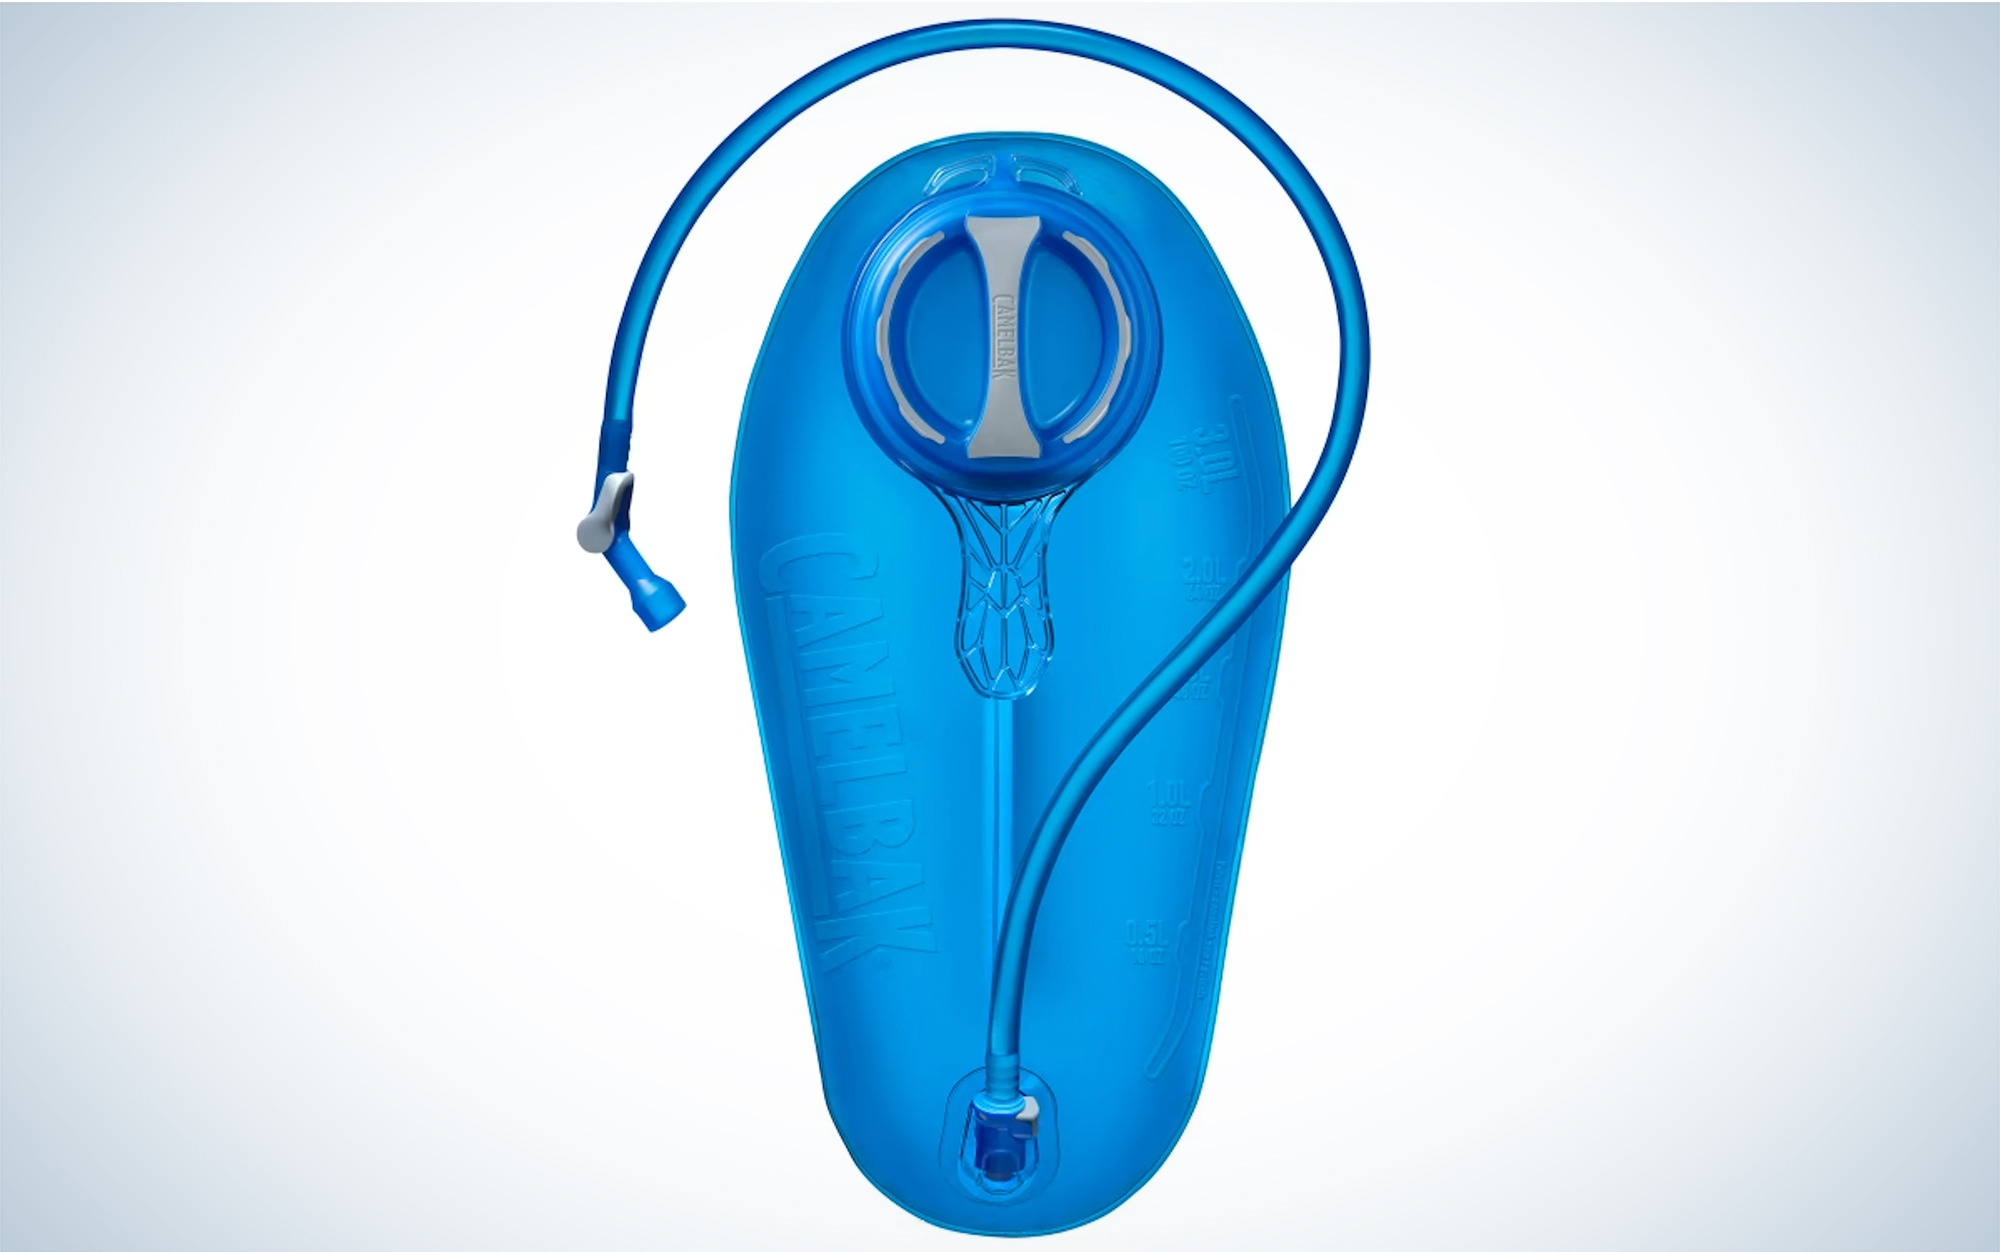 The CamelBak Crux is the best hydration bladder for hiking.